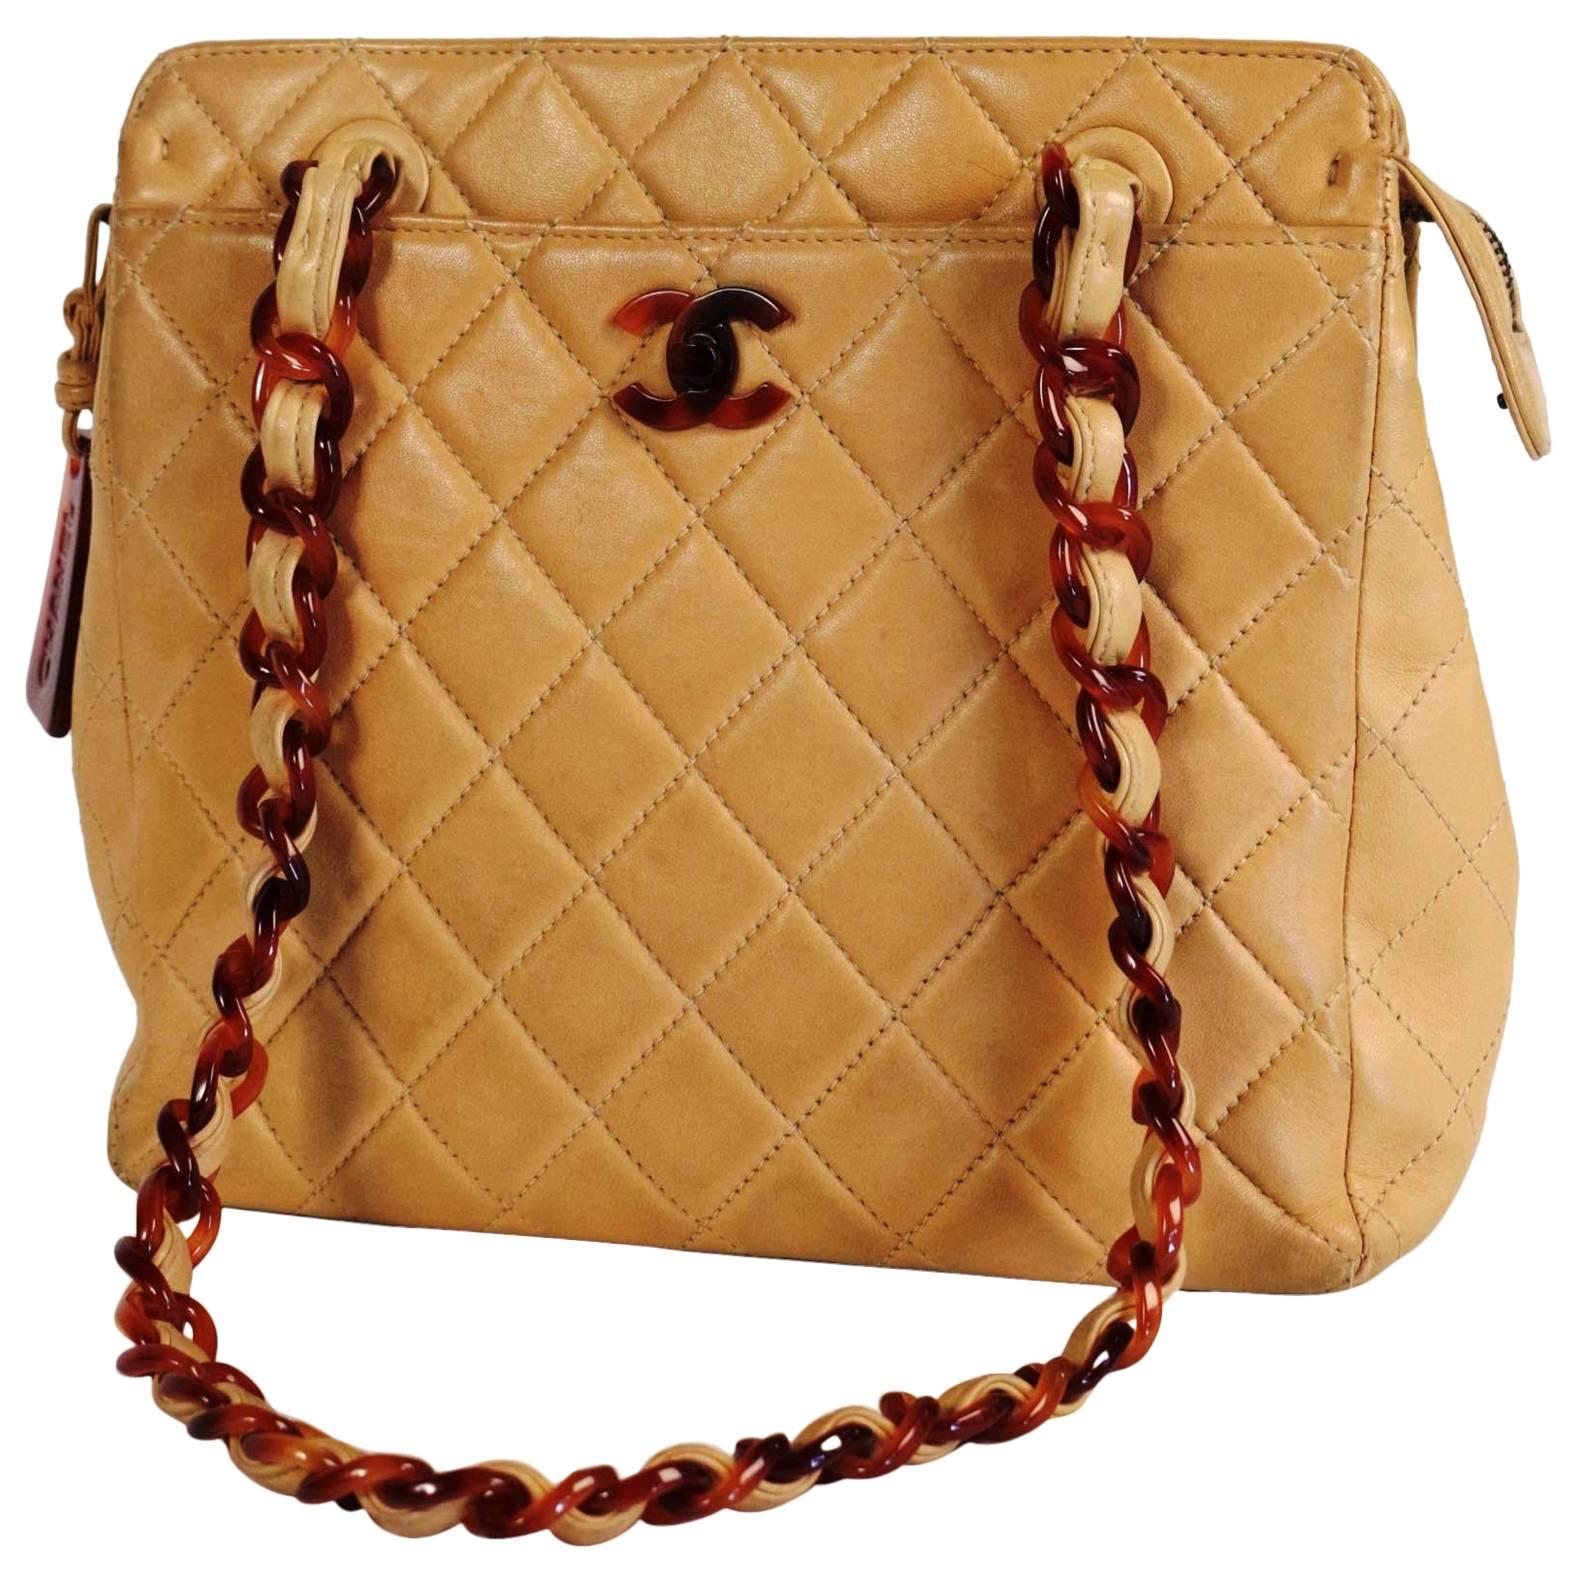 Chanel, Paris, Quilted Cream Leather Bag